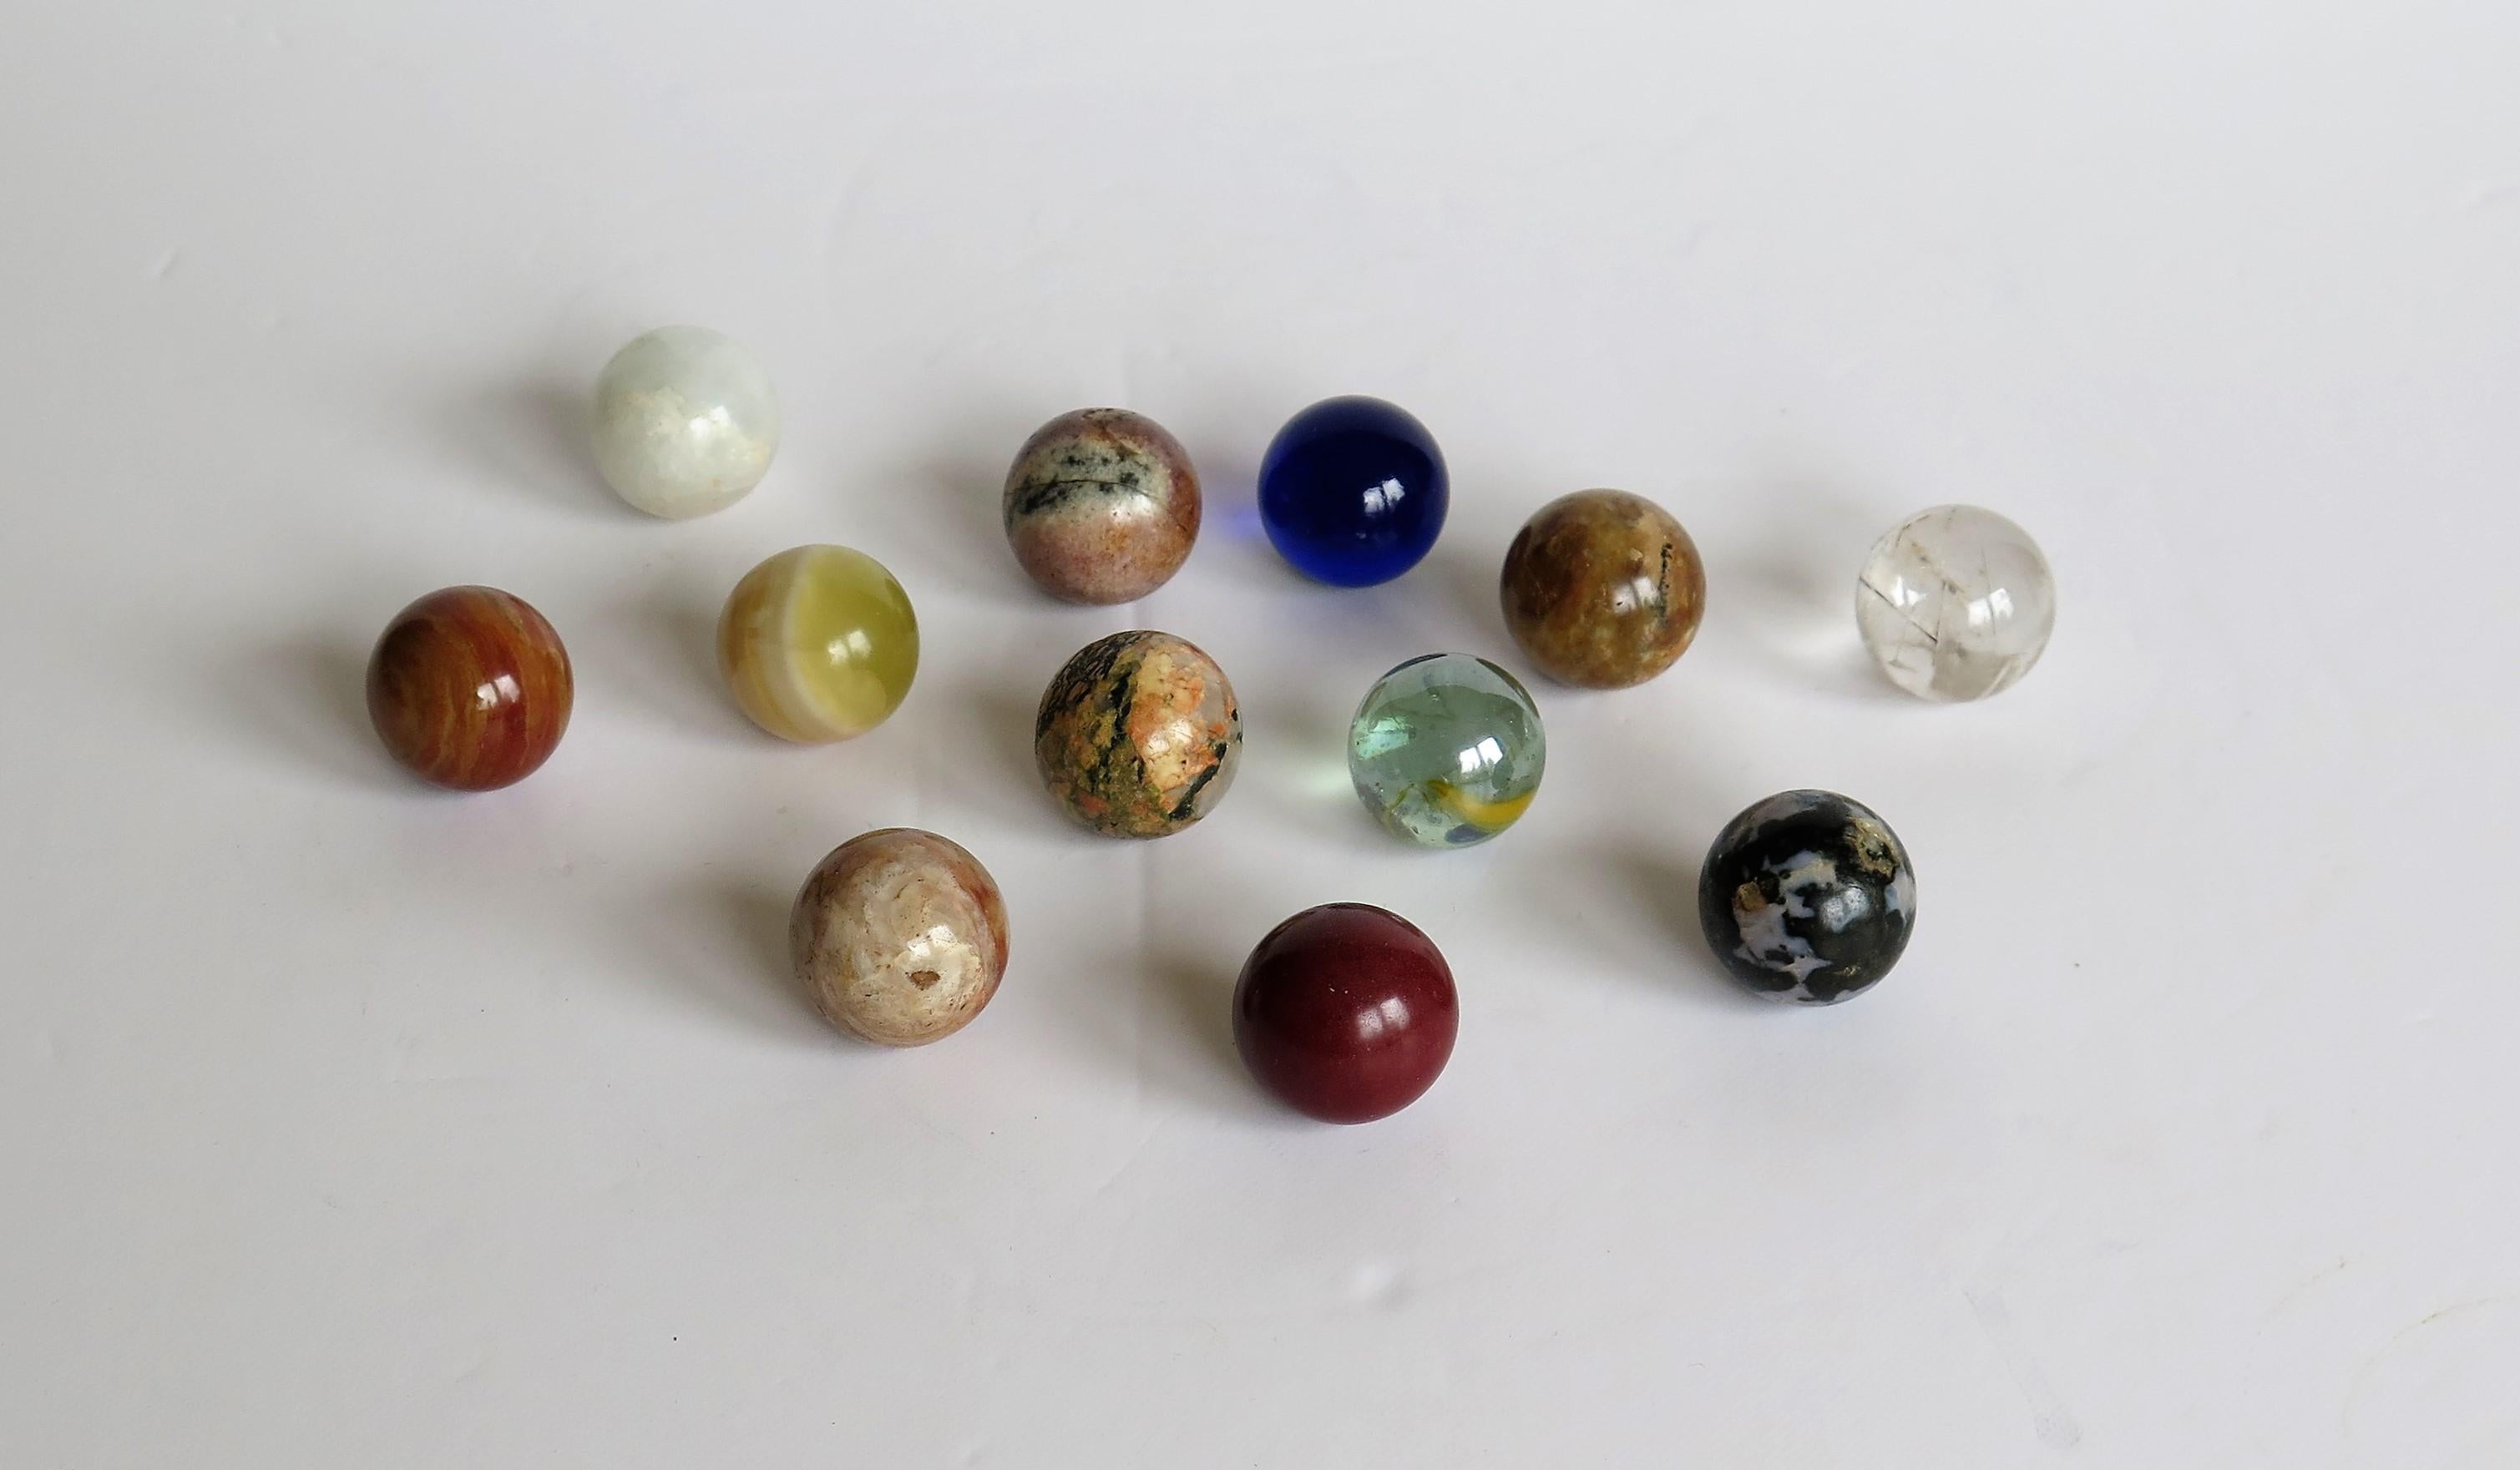 Fine Large Table Marble Solitaire Game with 36 Agate and Glass Marbles, French  7